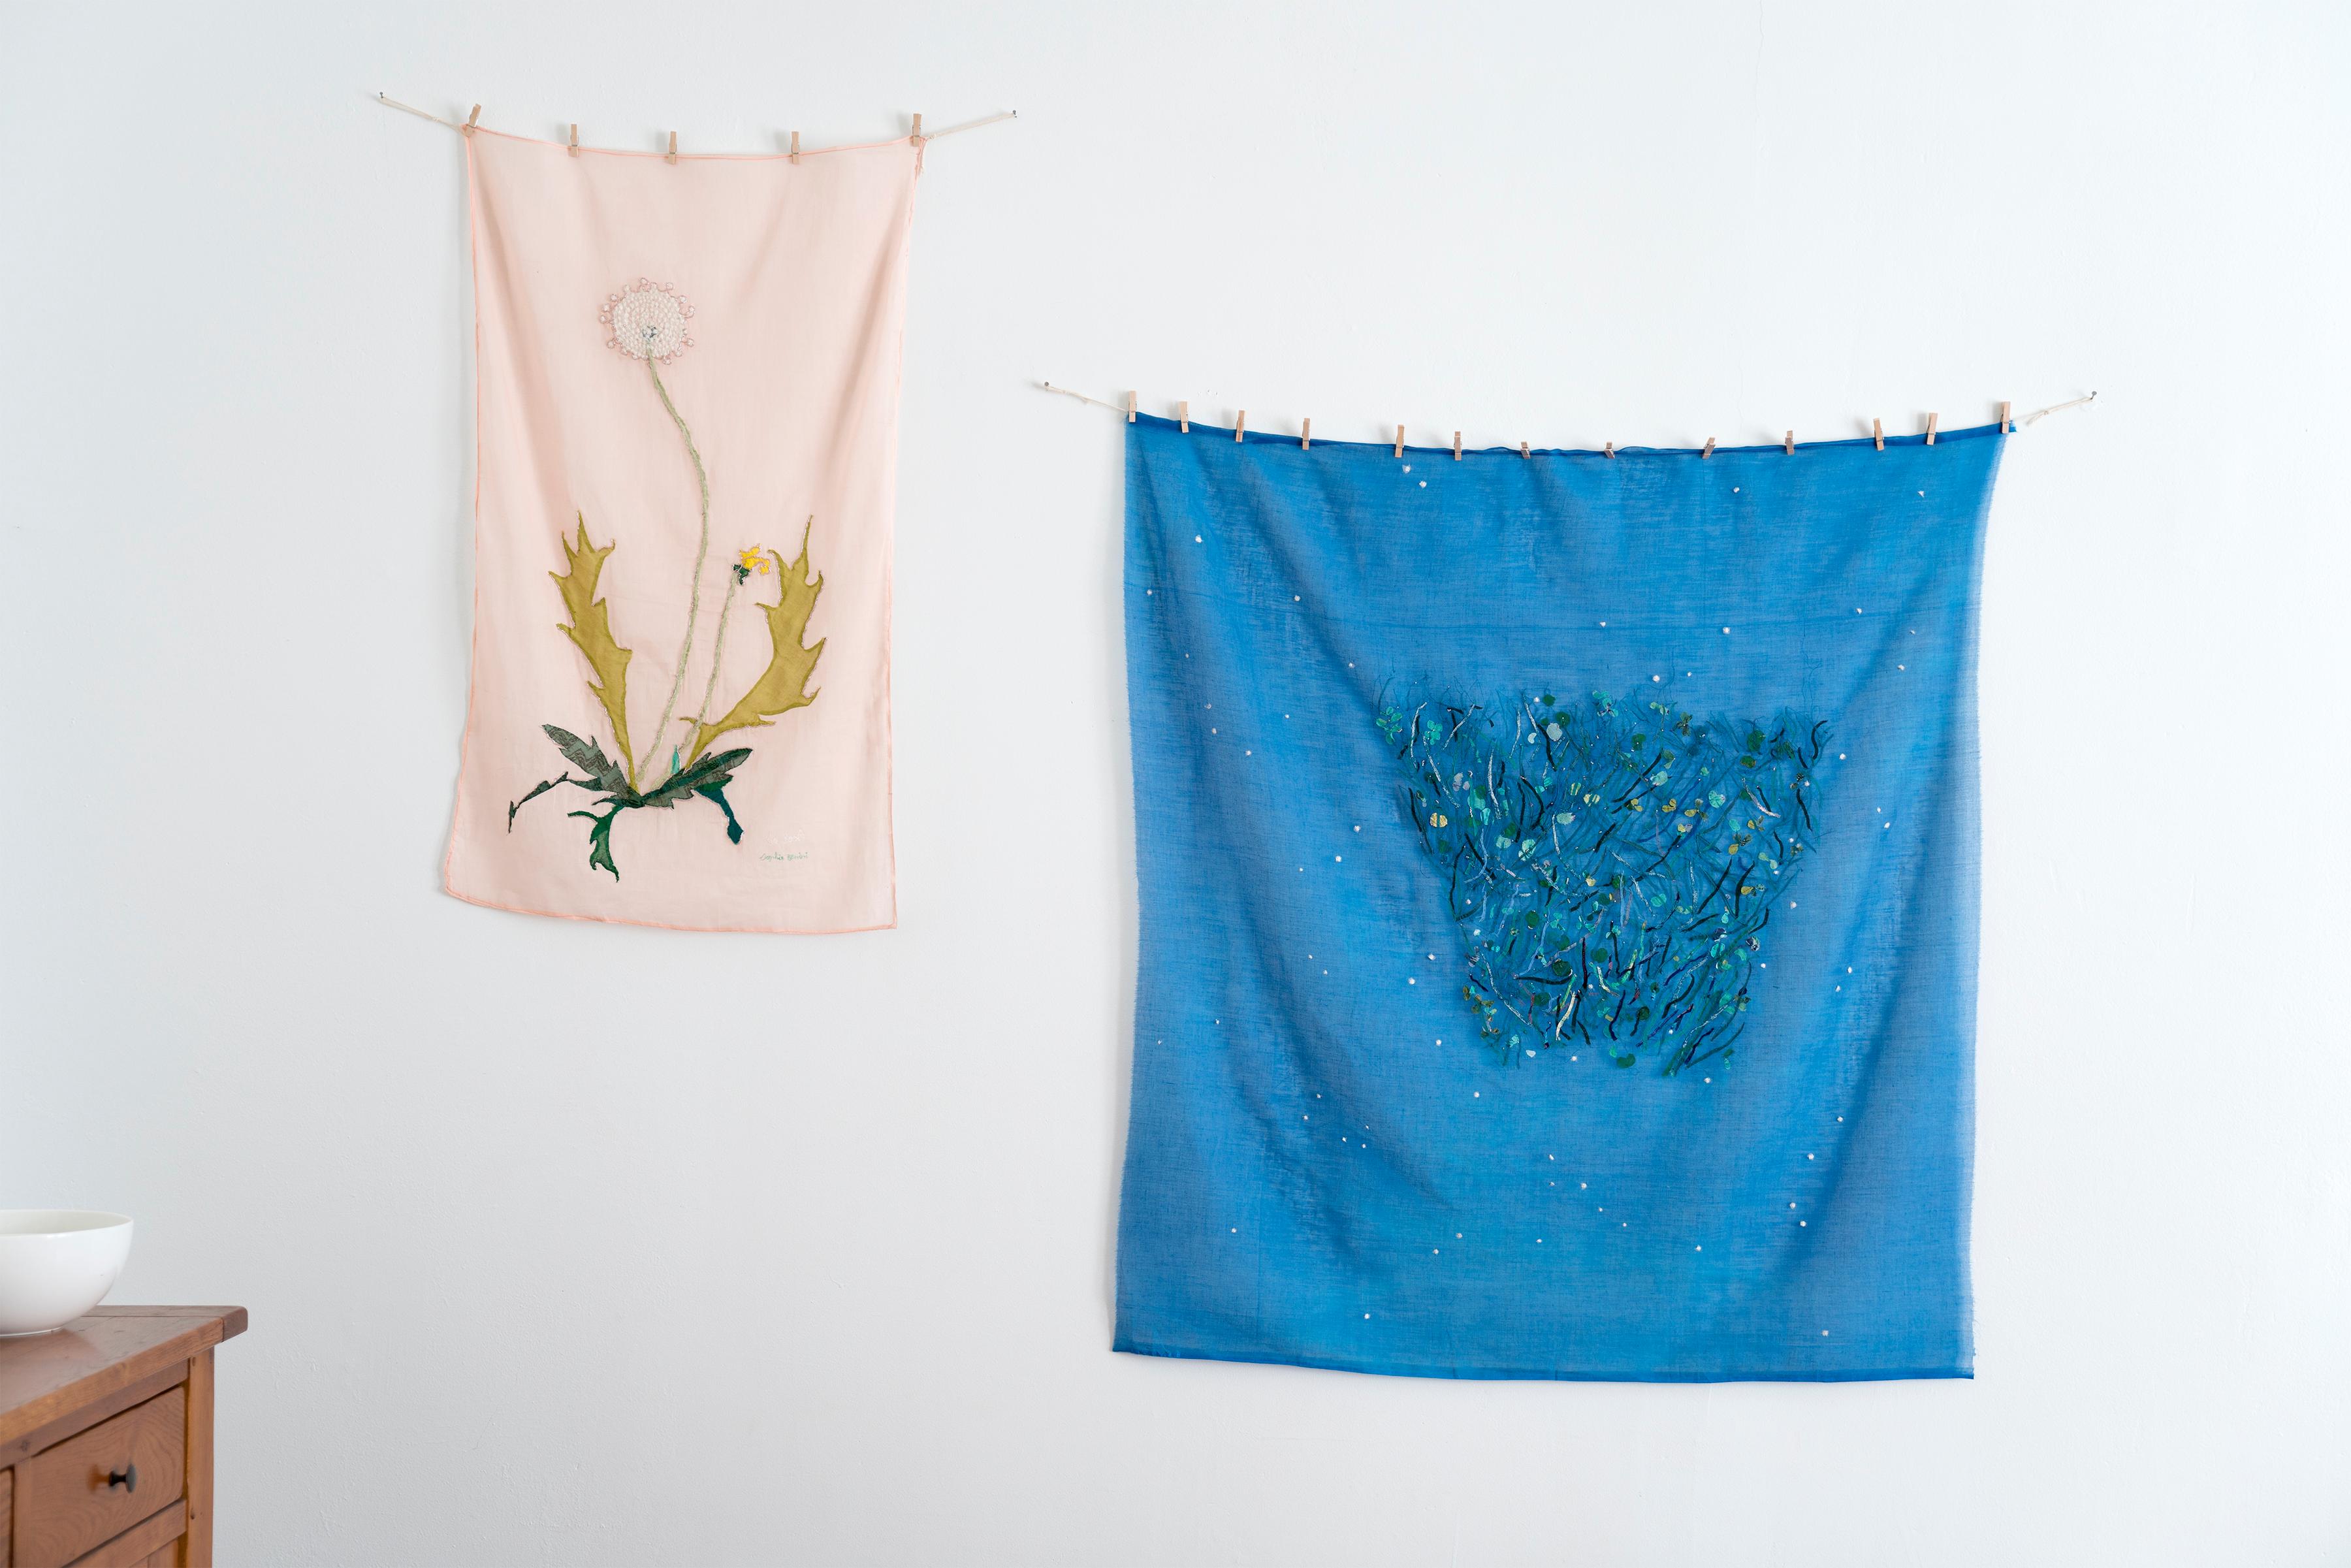 This work is an embroidery, a work on a delicate organza fabric. Medium: Organza fabric, silk threads and beads. Its a light almost transparent blue Organza fabric with beautiful stitches.

Meadow Under The Stars, showcases Benini's poetic